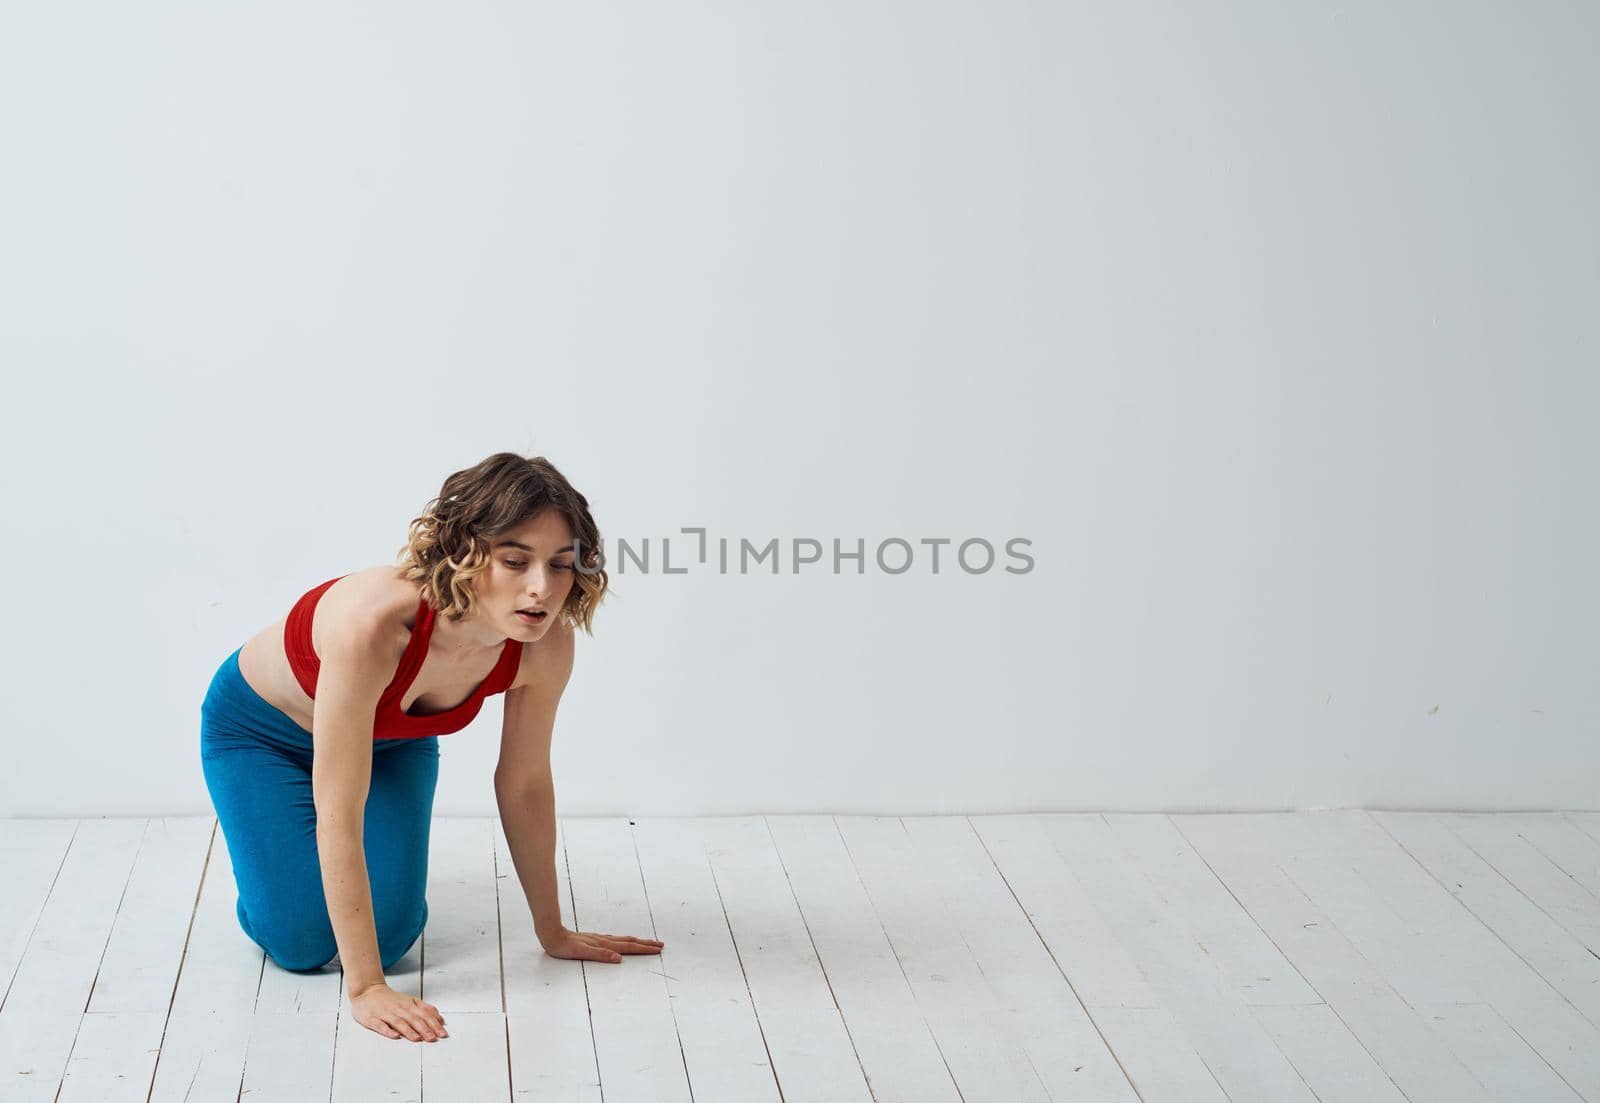 A slender woman is engaged in yoga for beginners on a light background in full growth by SHOTPRIME